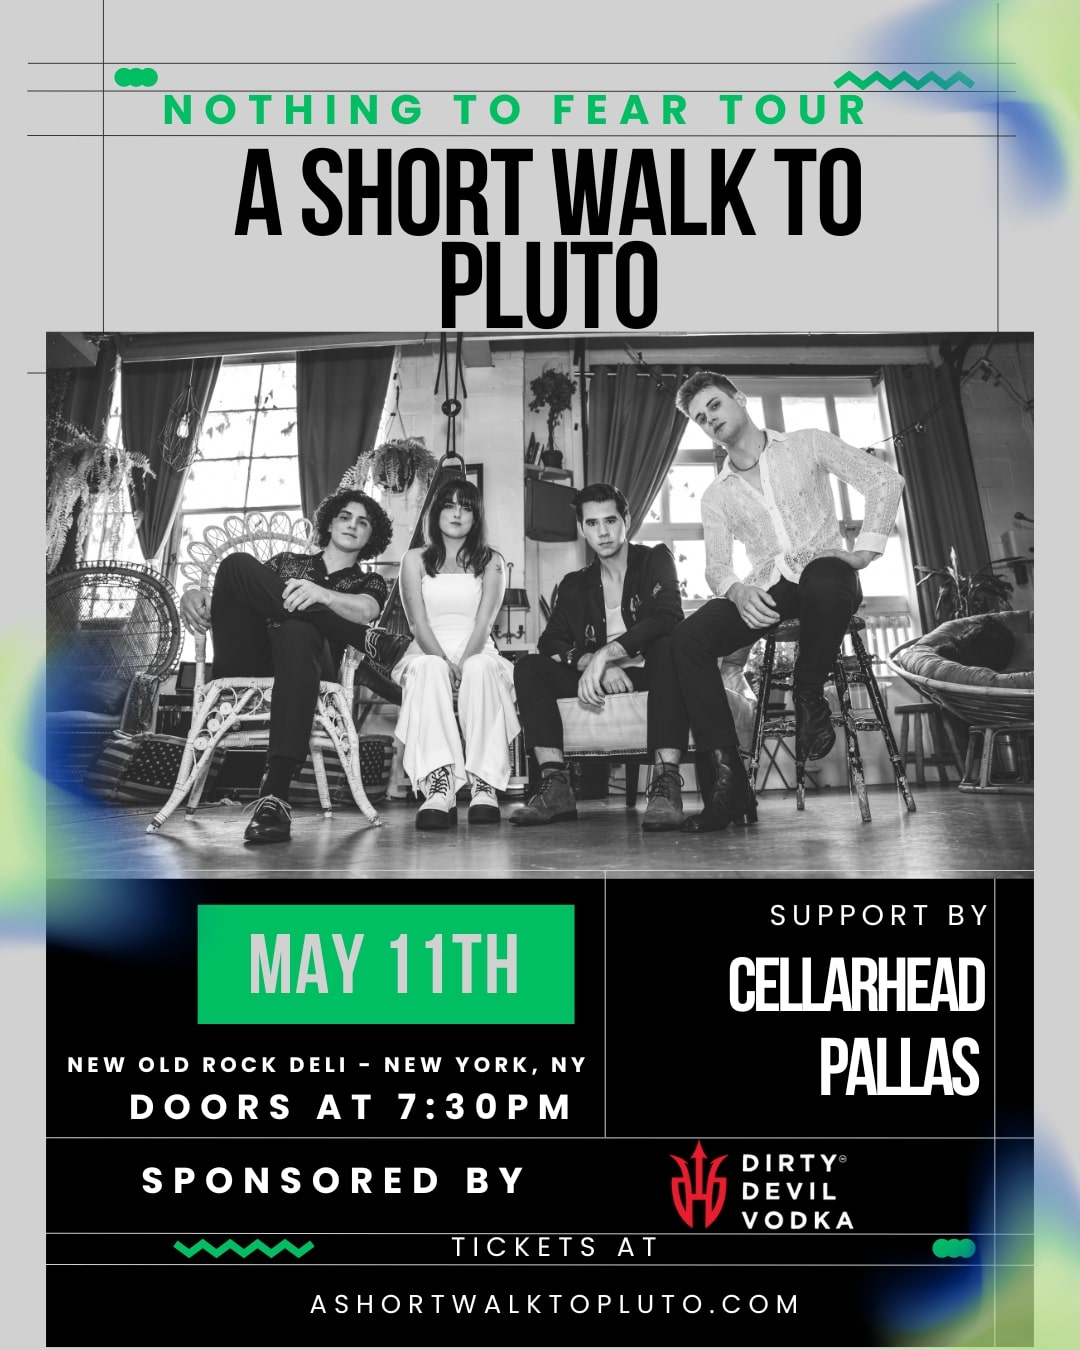 A Short Walk to Pluto LIVE in NYC at New Old Rock Deli - May 11th